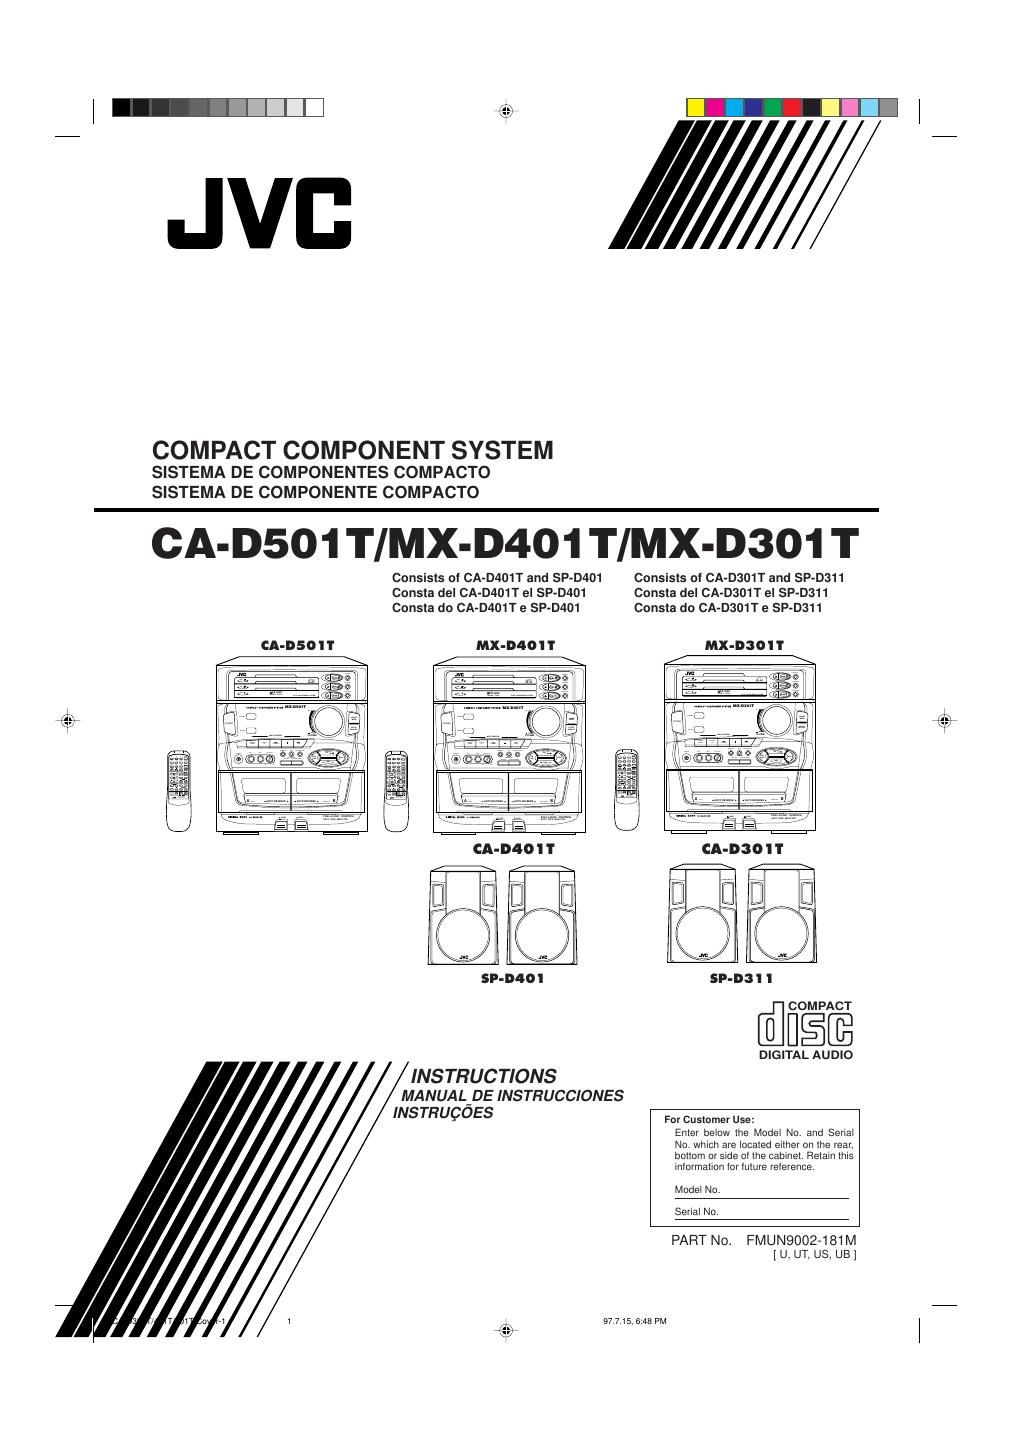 Jvc CAD 501 T Owners Manual